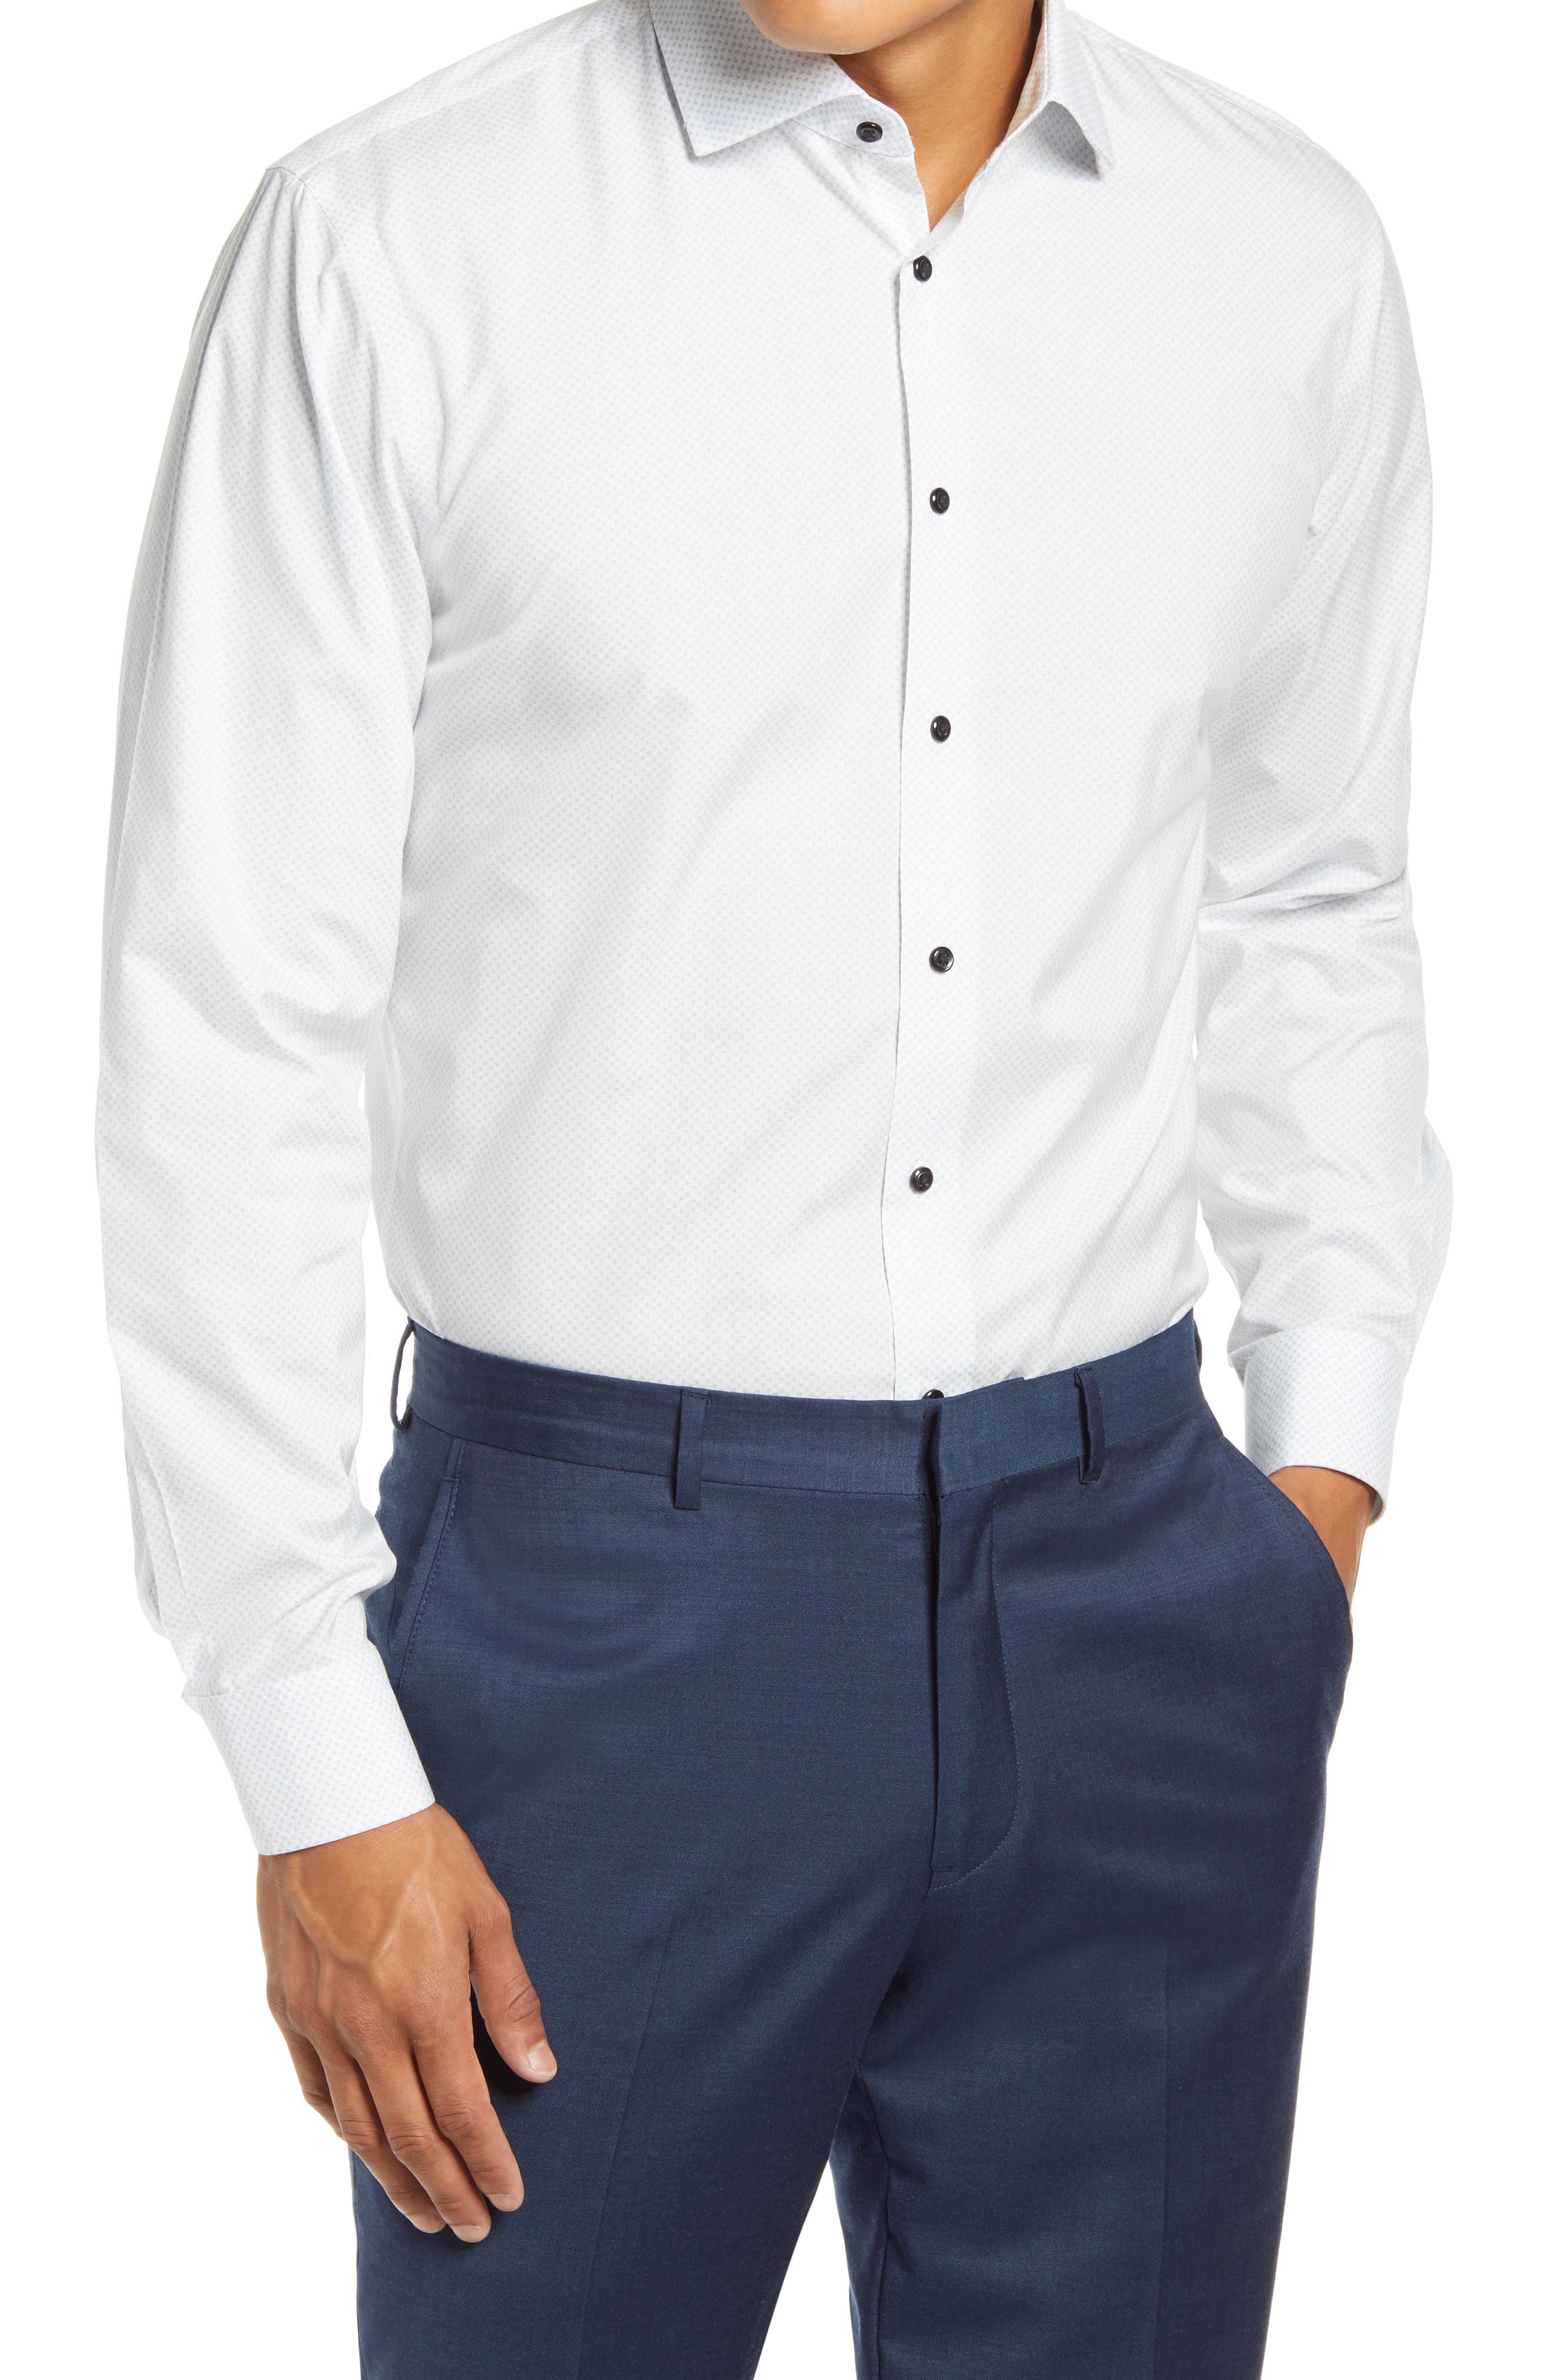 dress shirts for big and tall